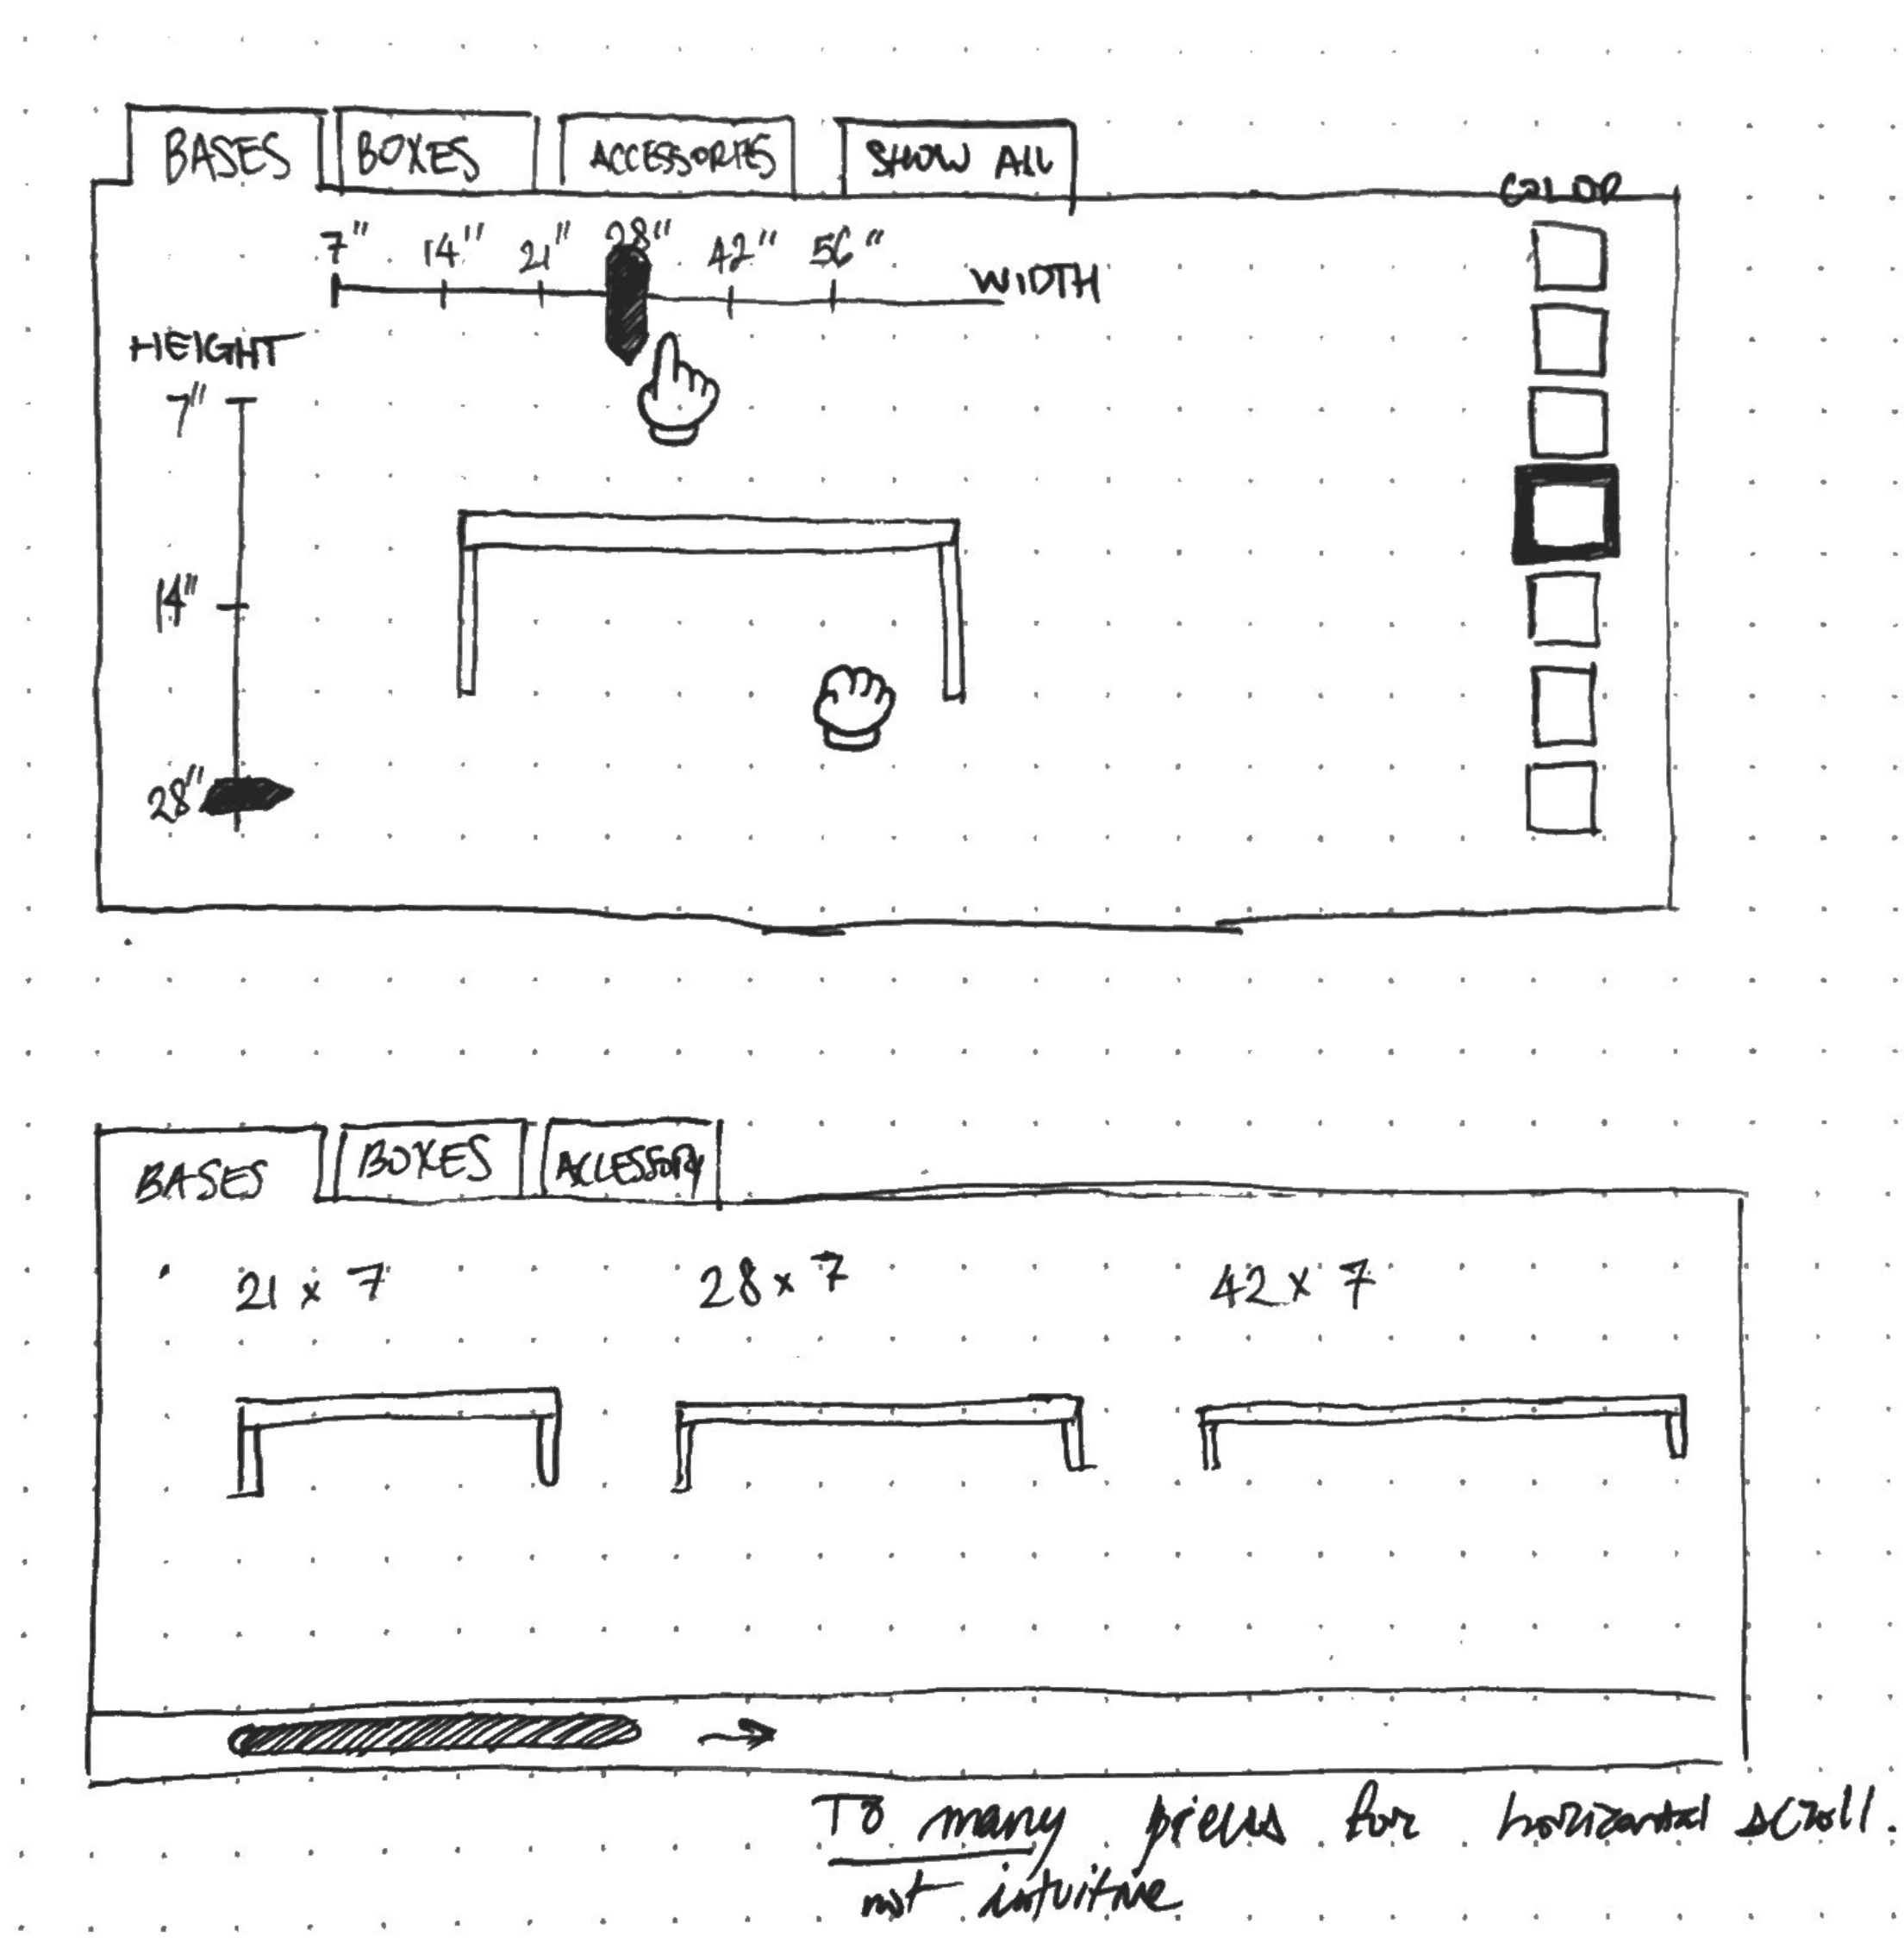 Early sketches of the panel interface